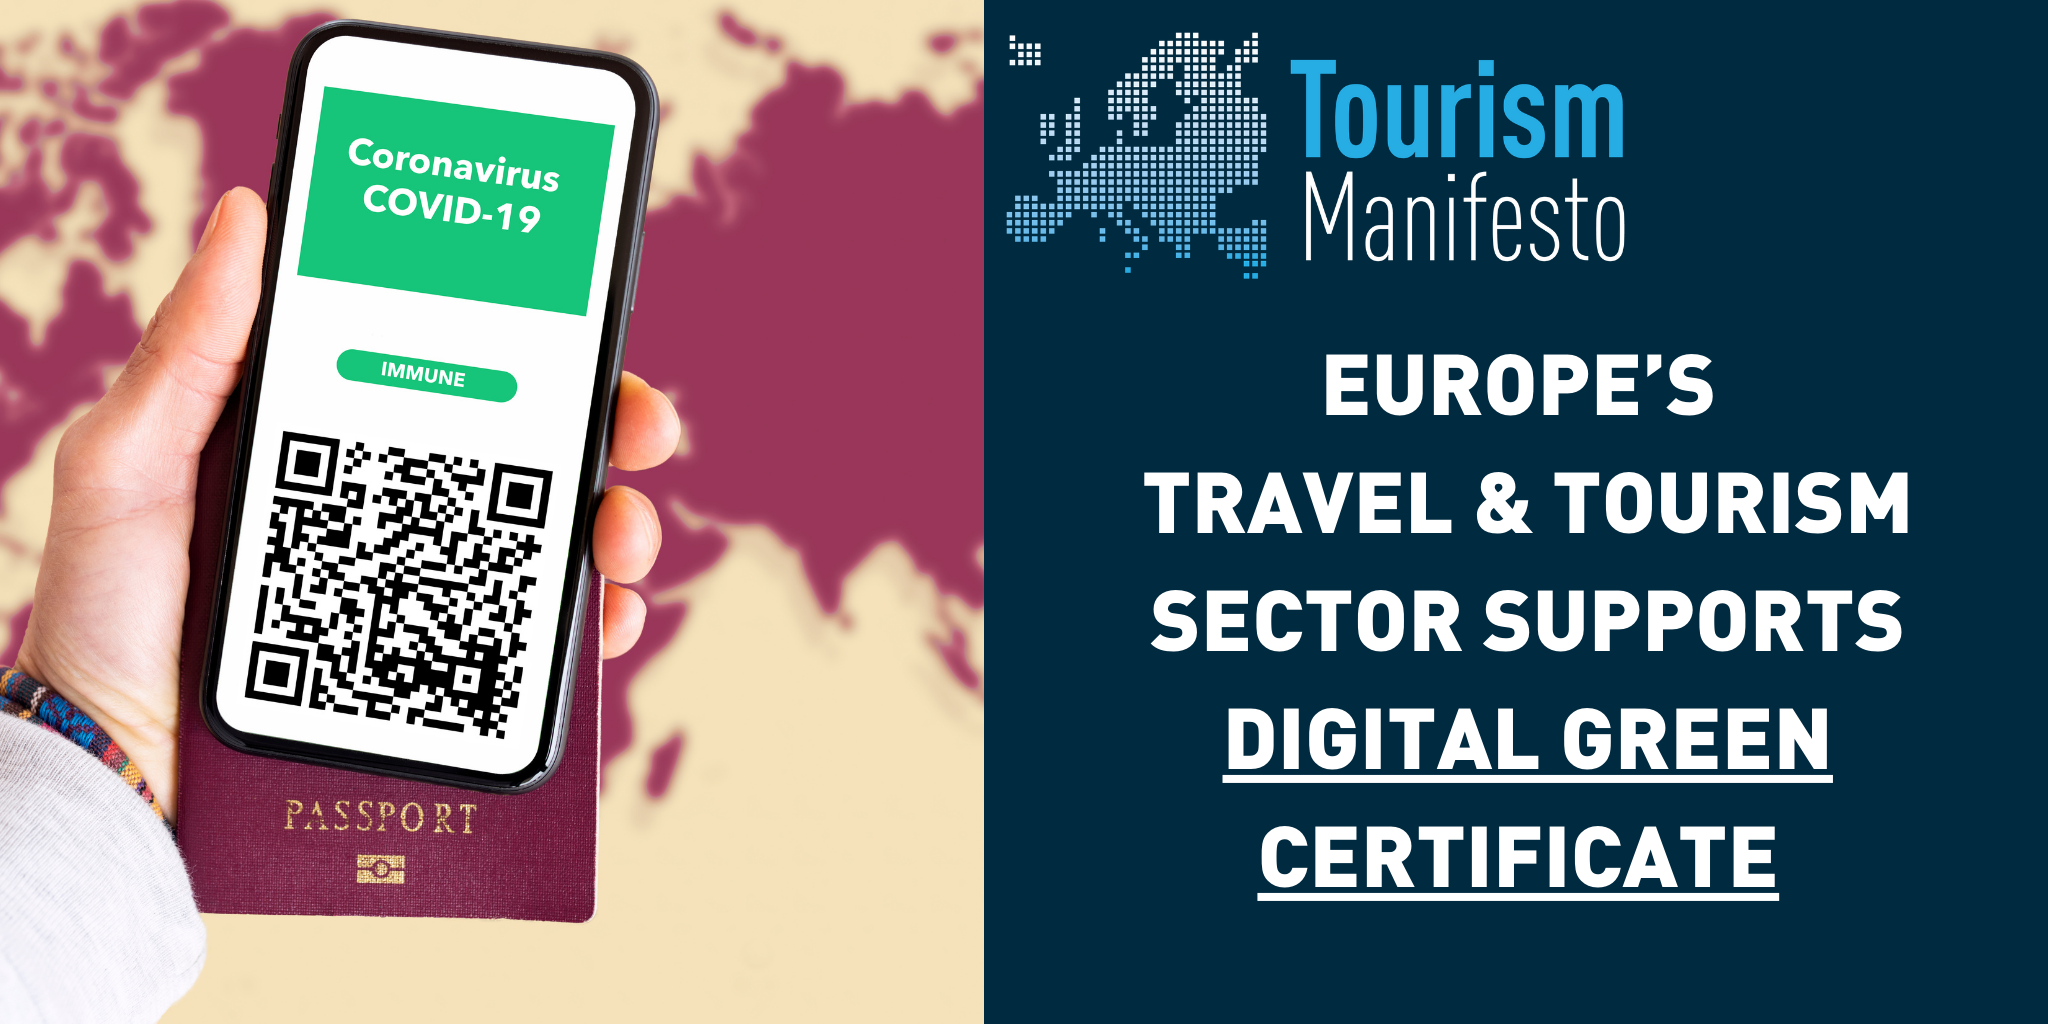 Banner EU Green certificate is supported by Tourism Manifesto Group. QR code and passsport